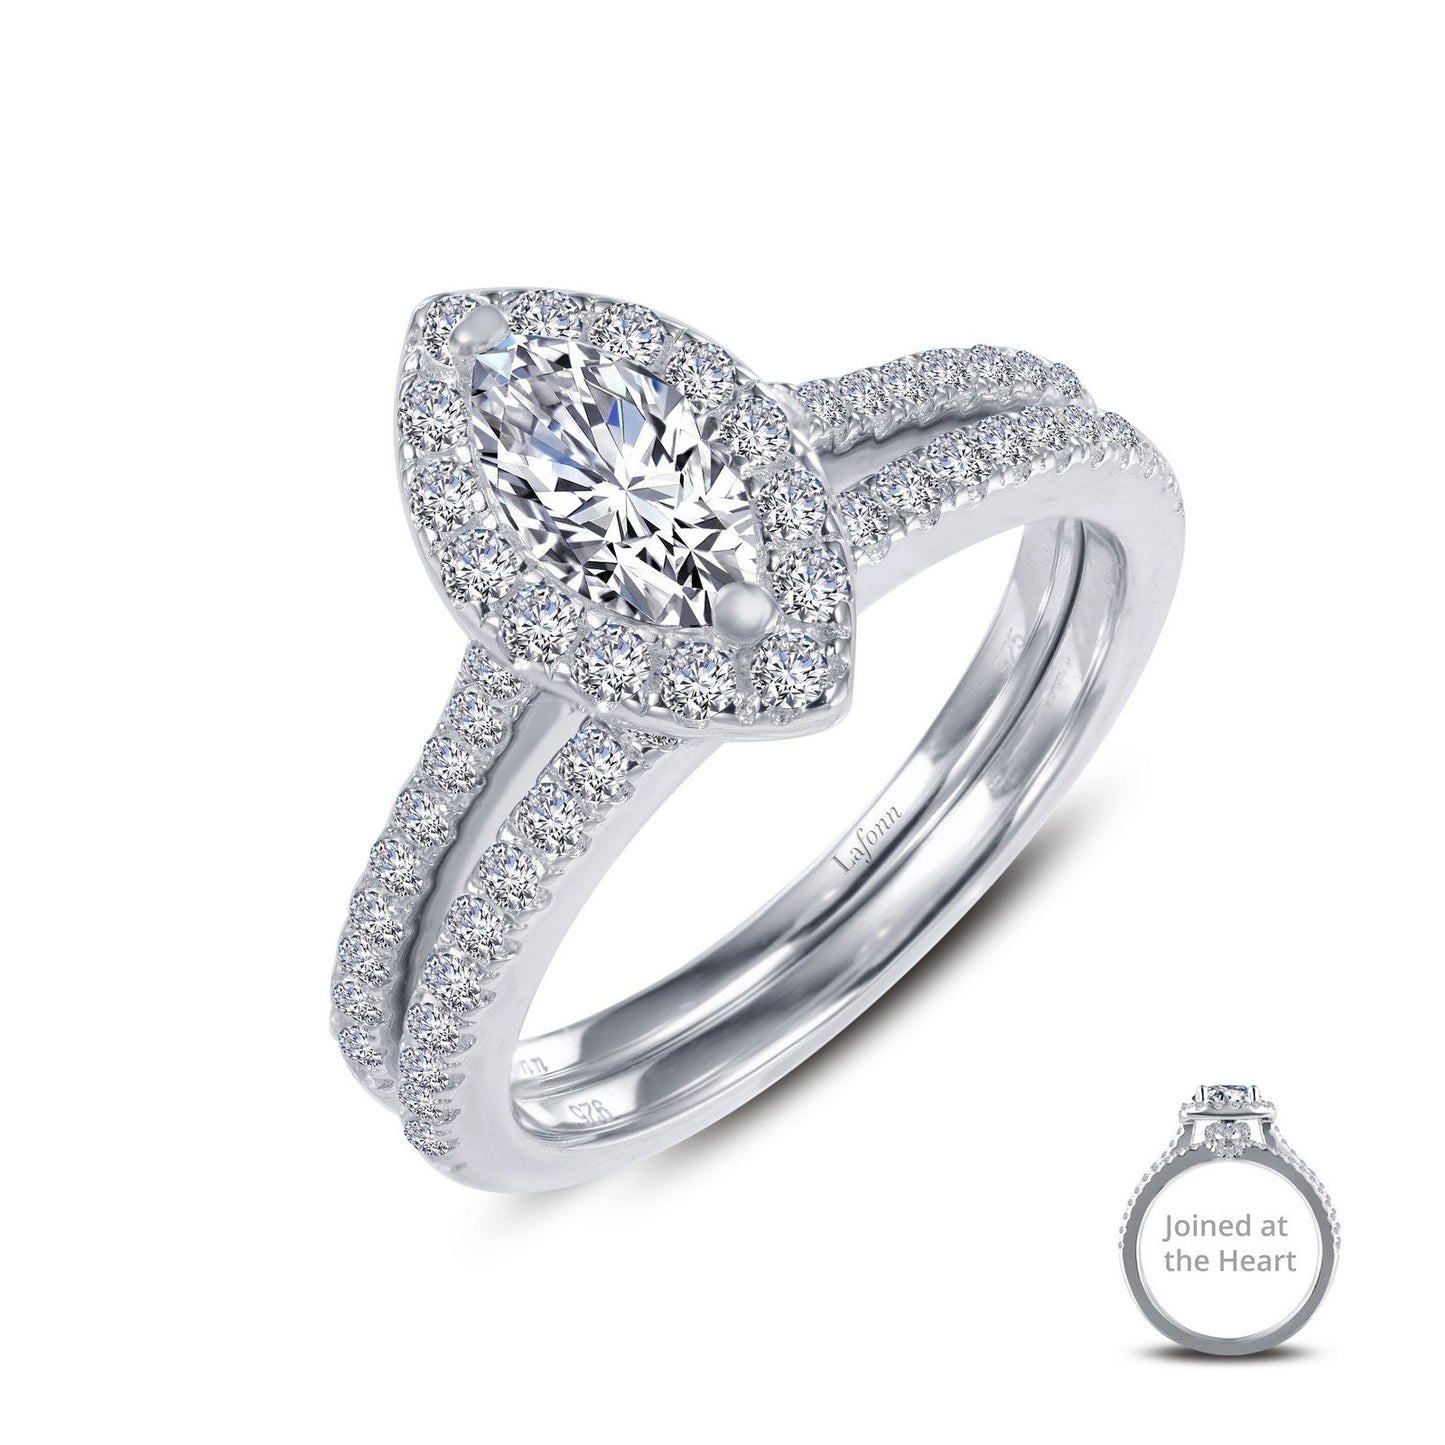 LaFonn Platinum Simulated Diamond Size: 8X4mm Marquise, Approx. 0.47 CTW RINGS Joined-At-The-Heart Wedding Set